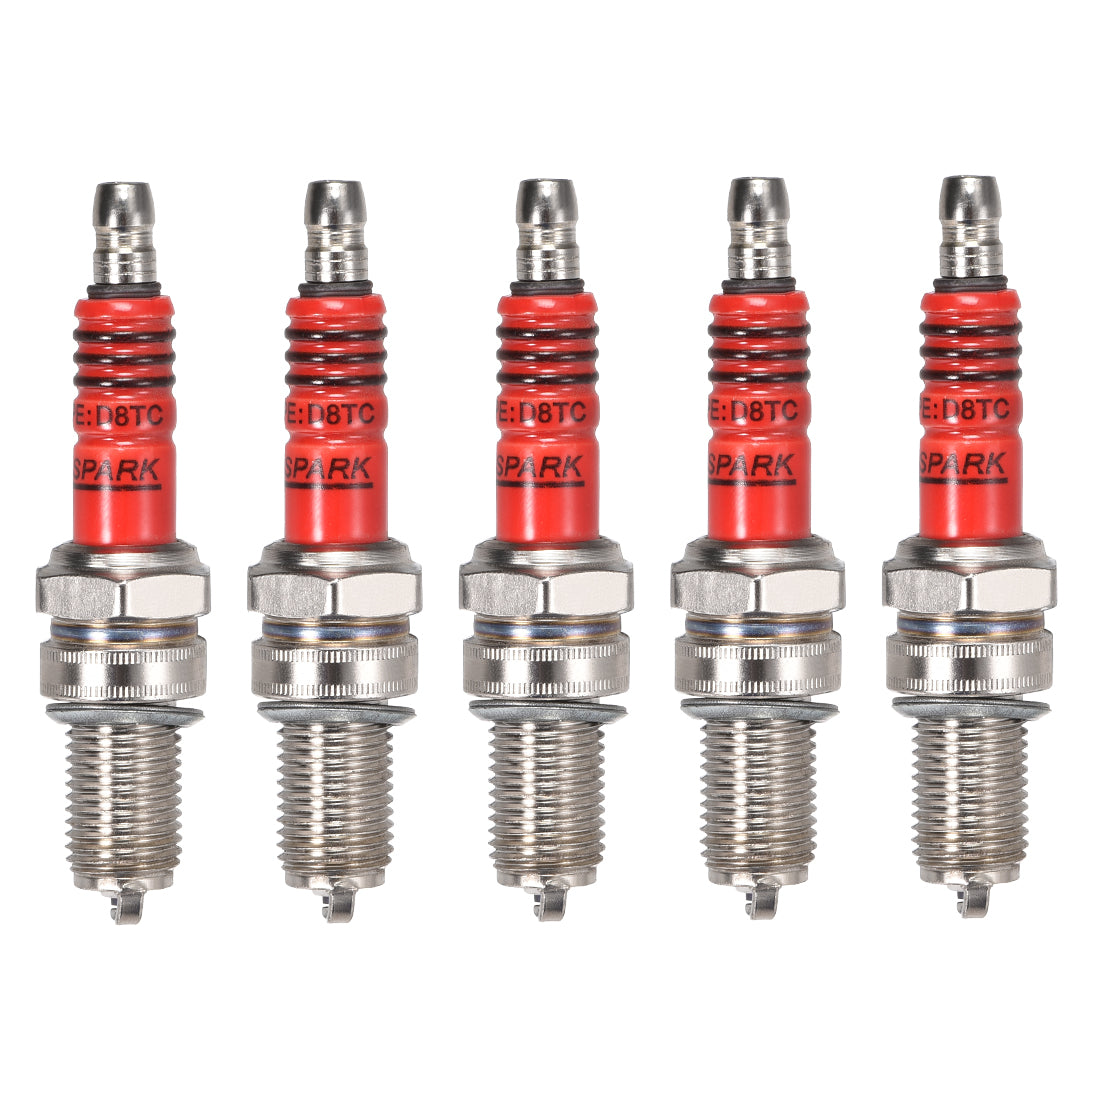 uxcell Uxcell D8TC Spark Plug Red for CG125 150 175 200 Motorcycle ATV Dirt Bike , 5pcs